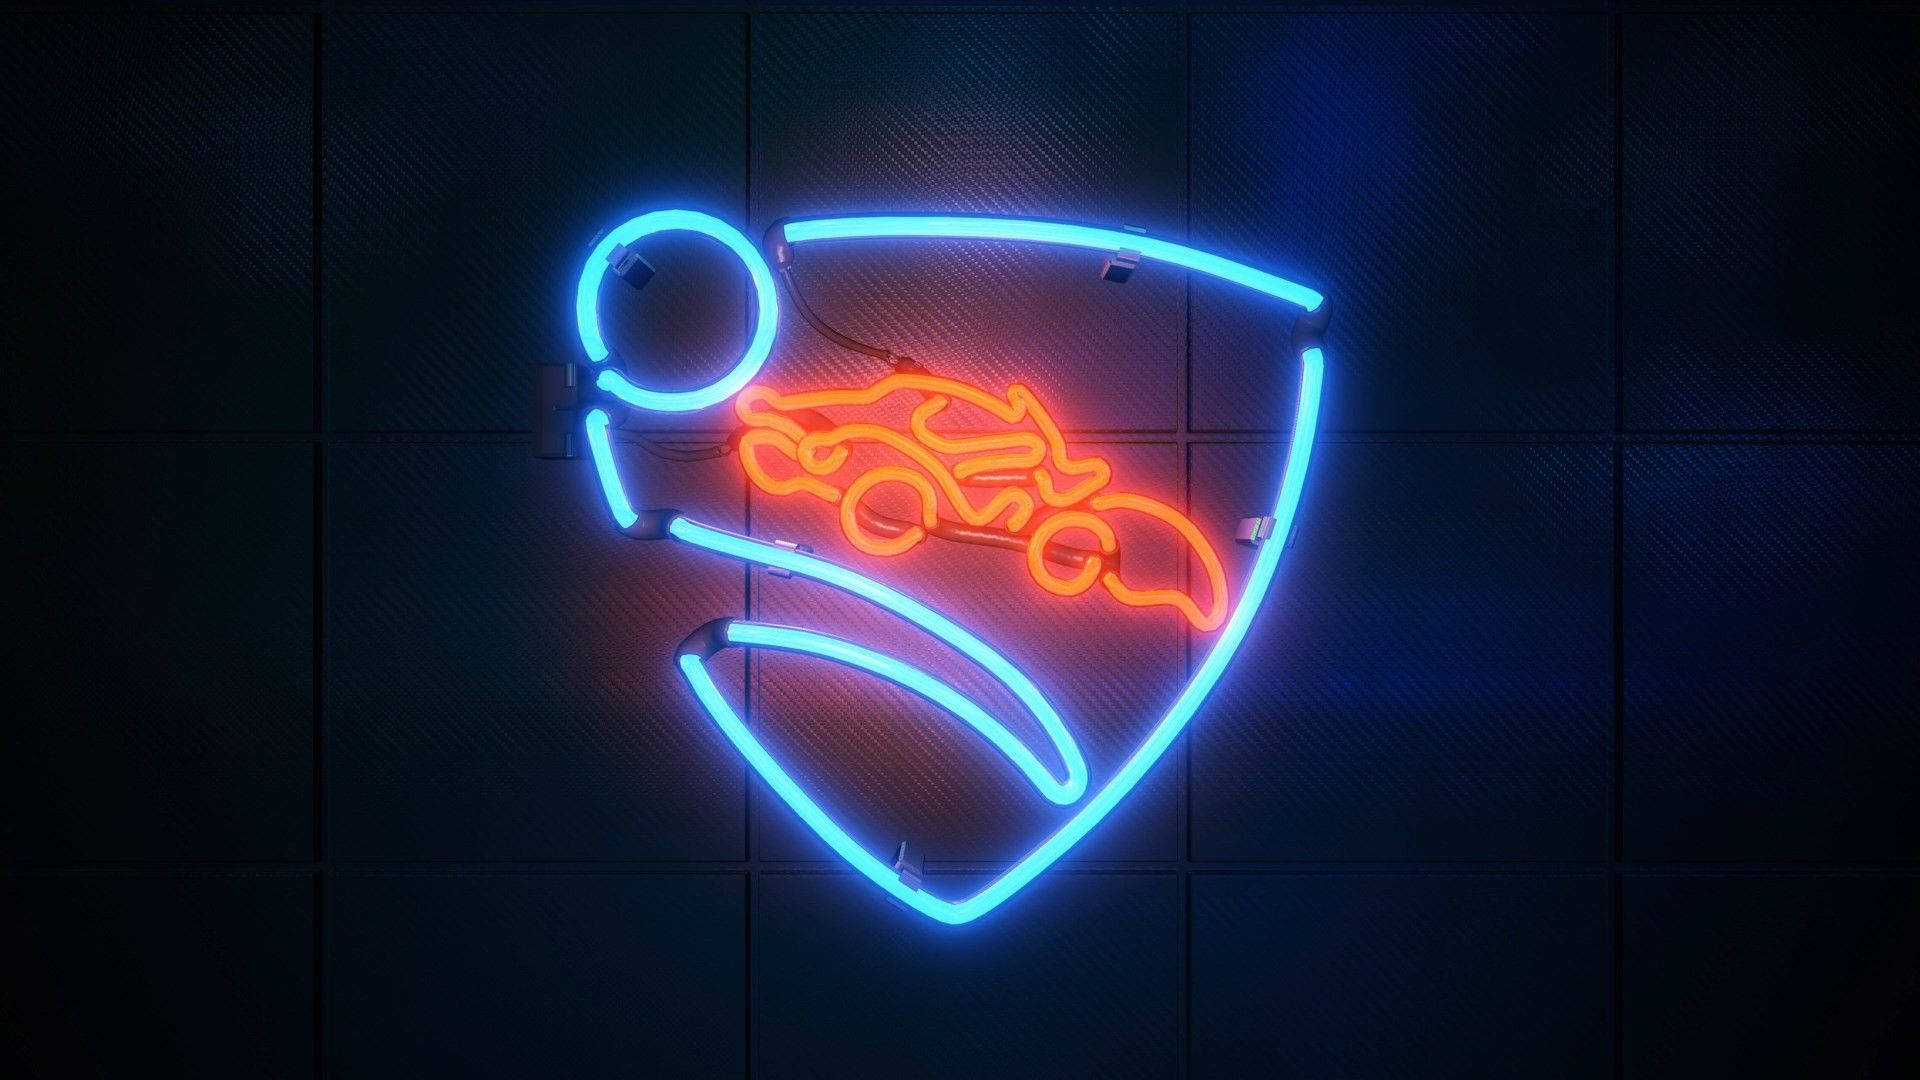 Accelerate into the Future with Rocket League Wallpaper